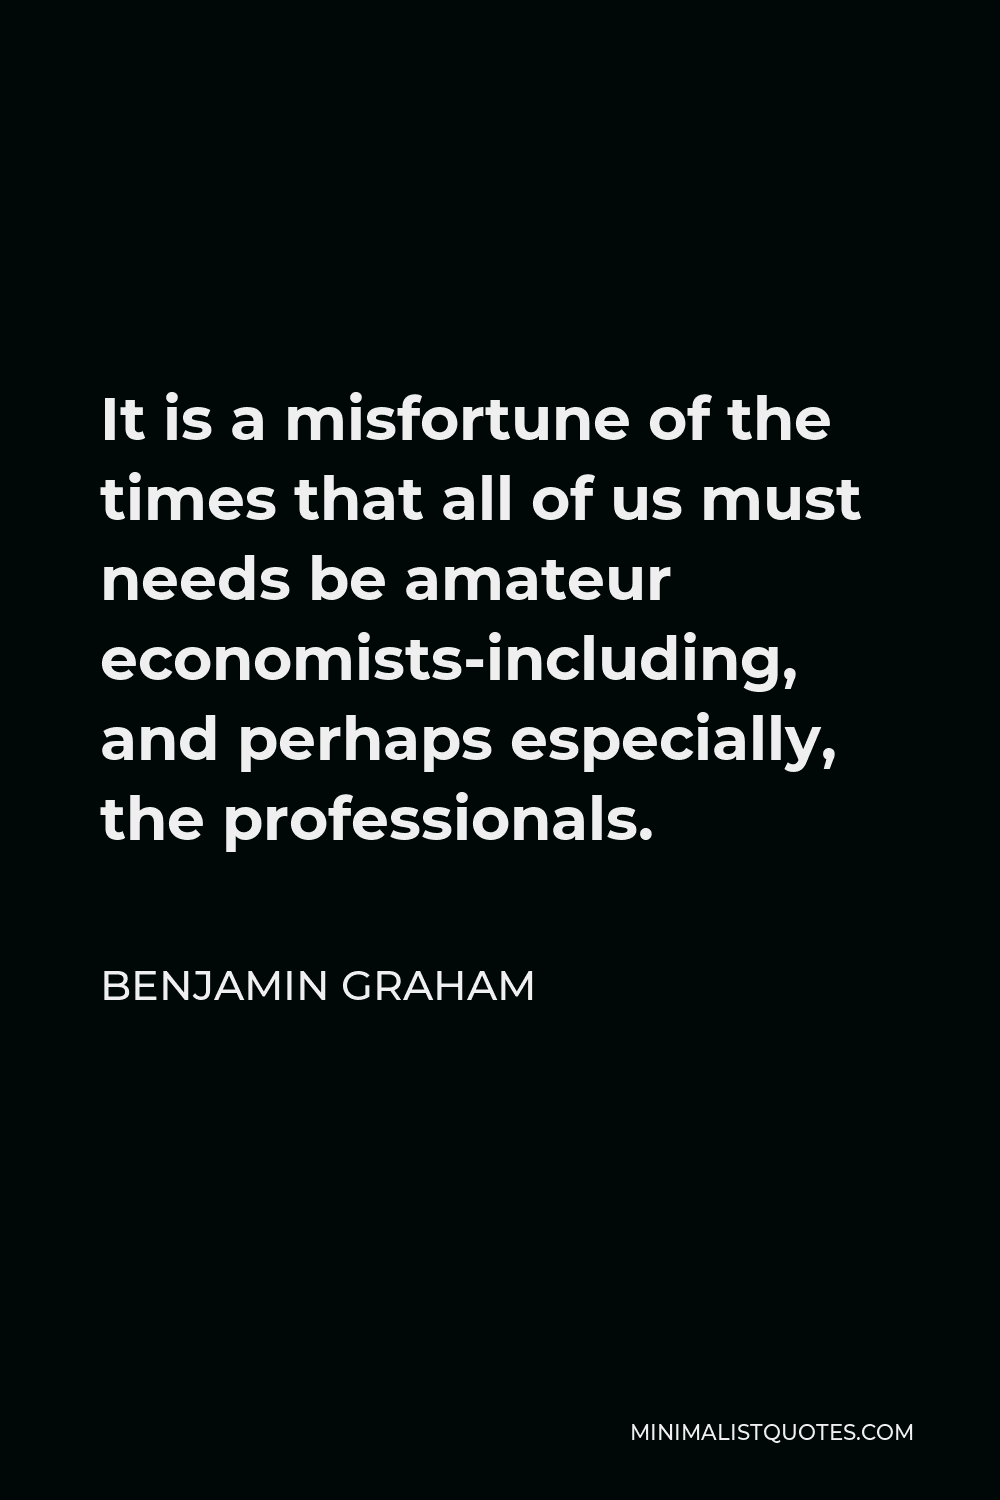 Benjamin Graham Quote - It is a misfortune of the times that all of us must needs be amateur economists-including, and perhaps especially, the professionals.